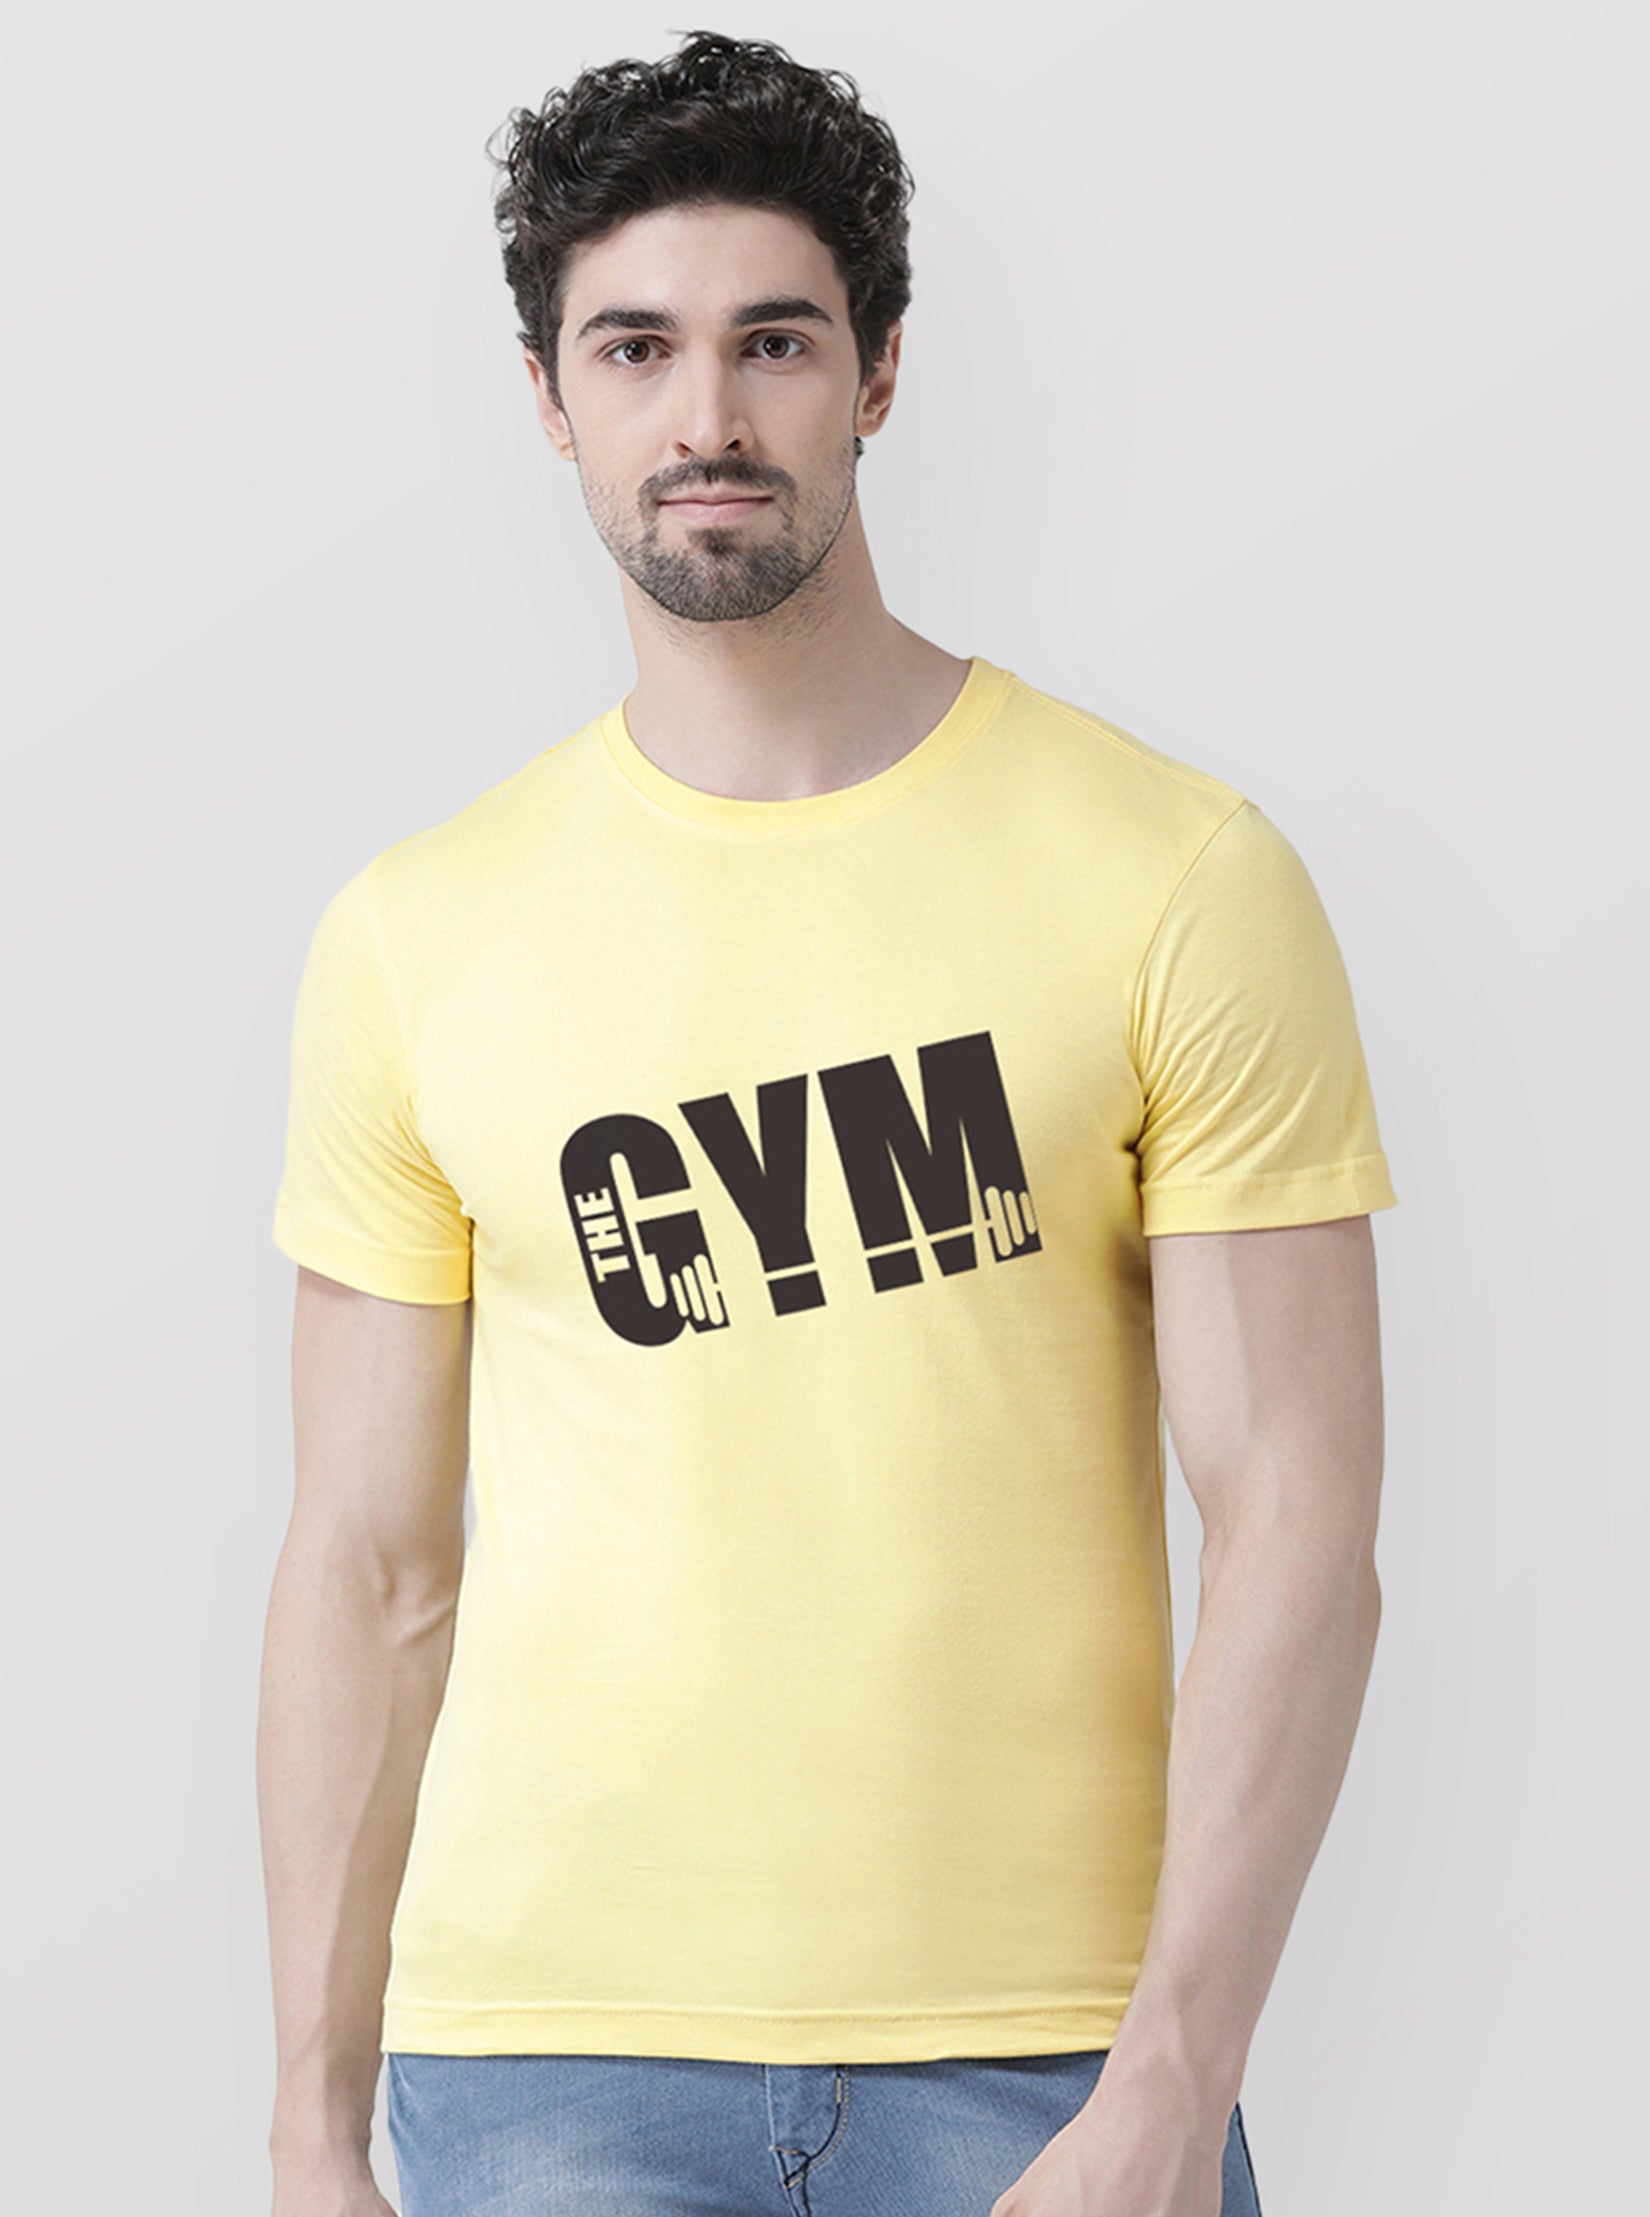 GYM Printed Round Neck Half Sleeves T-shirt - Friskers